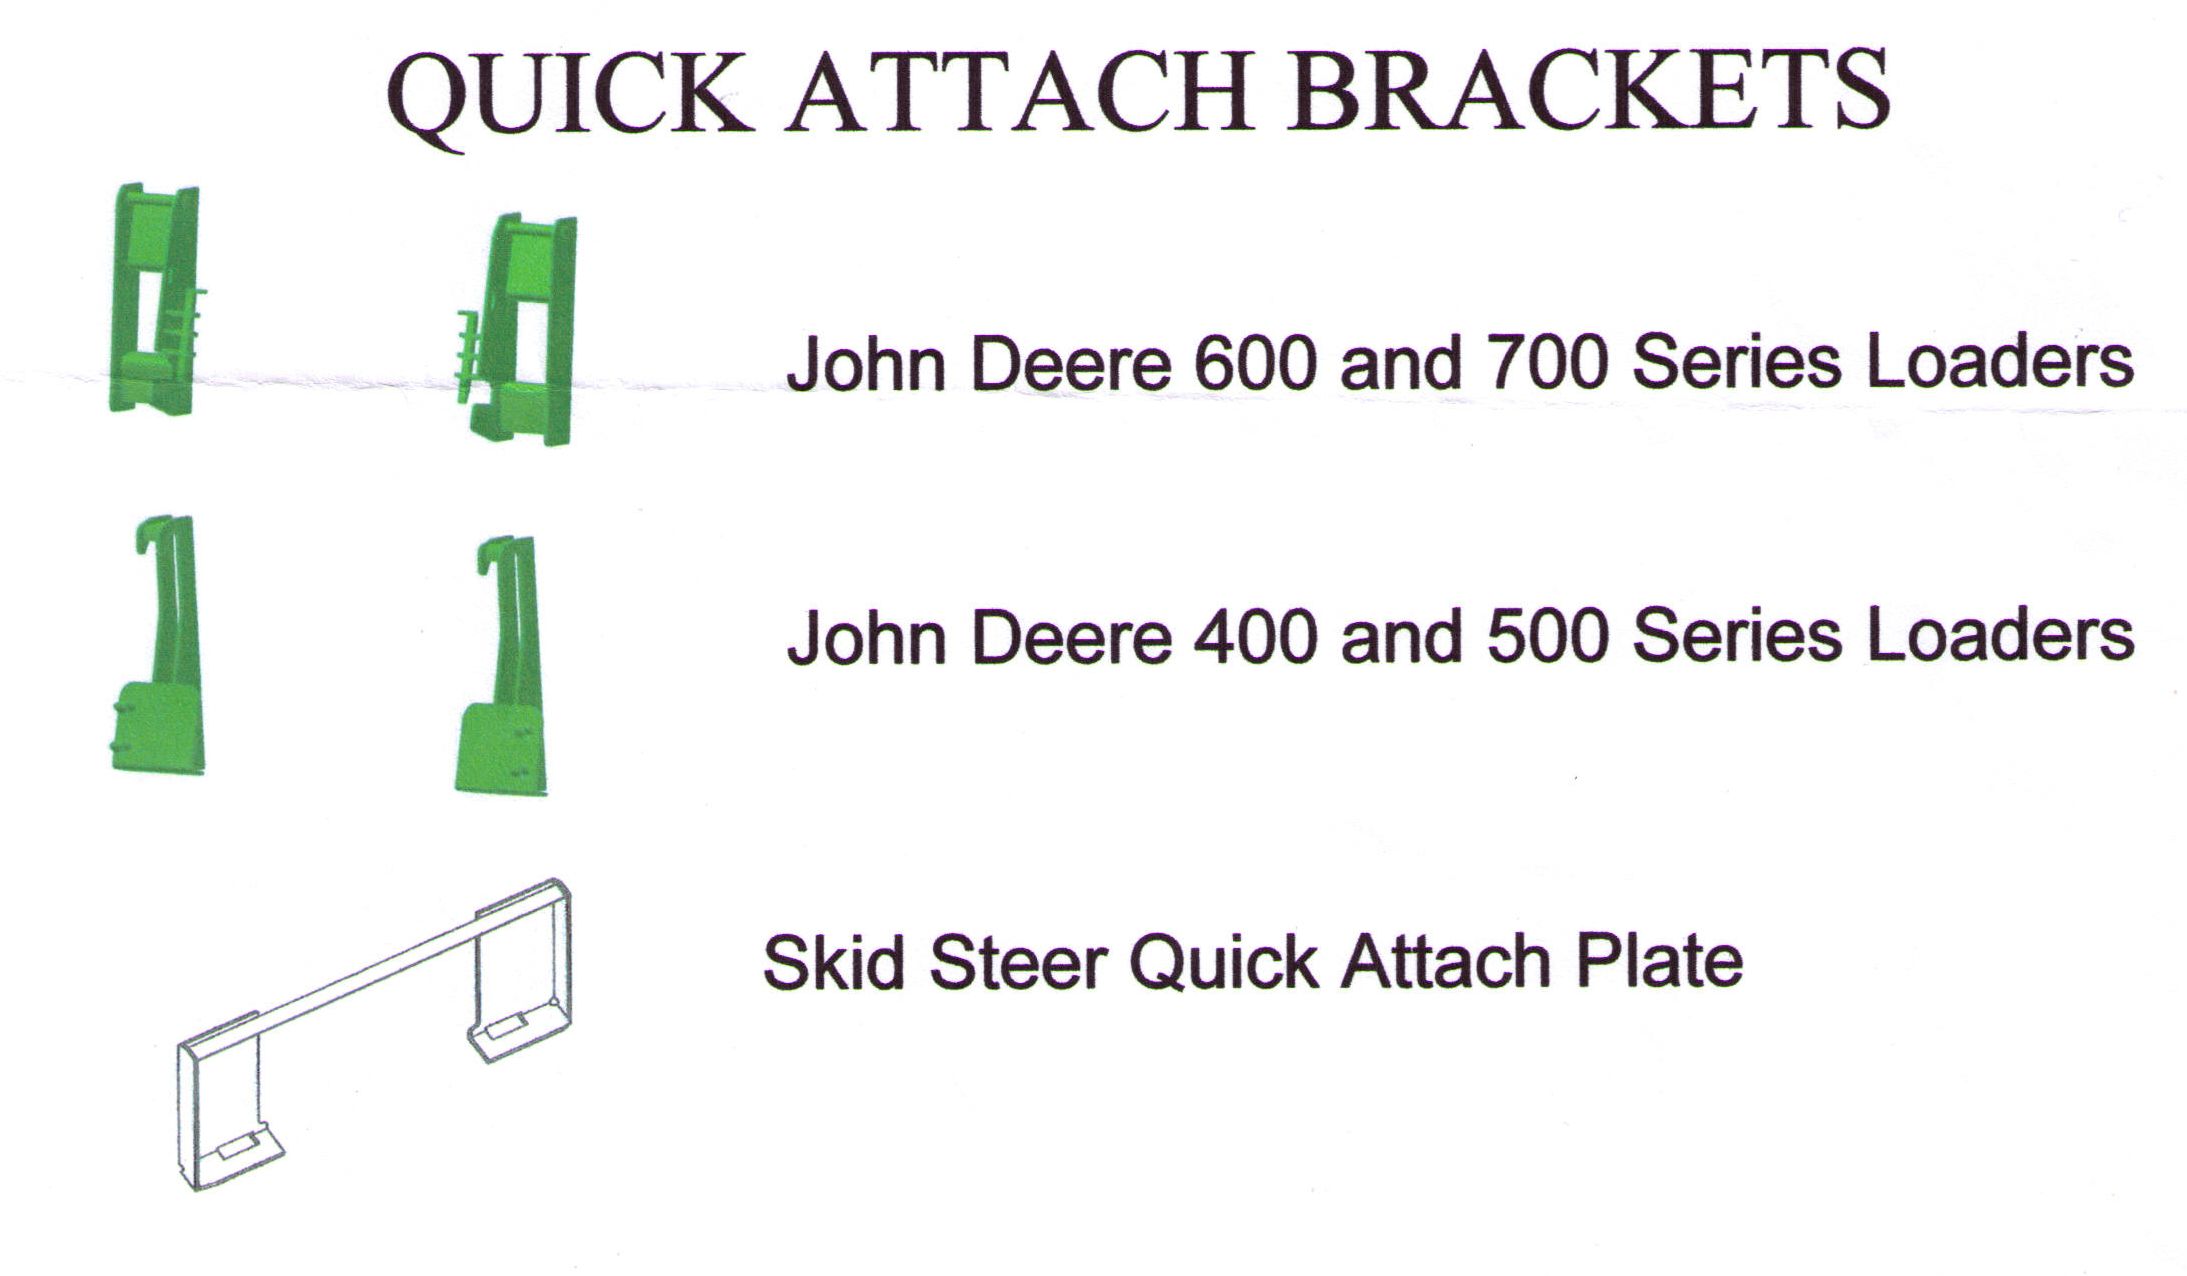 Weld On Quick Attach Brackets For John Deere And Weld On Skid Steer Plate For Skid Loaders That Are Quick Attach